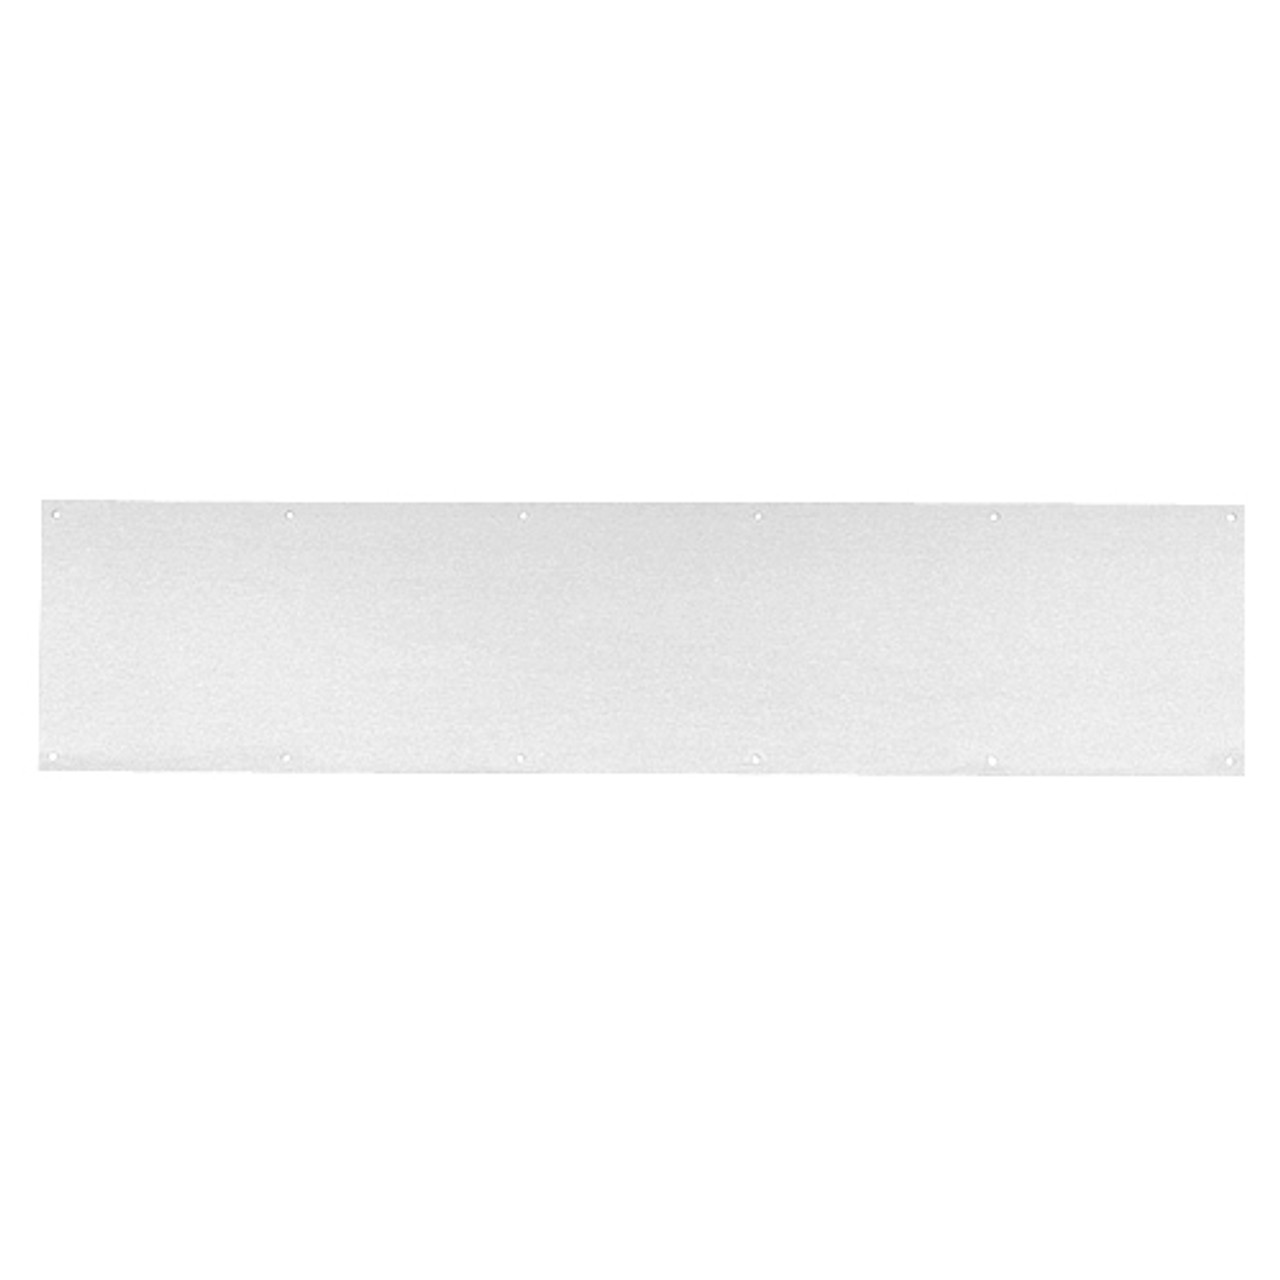 8400-US28-6x28-B-CS Ives 8400 Series Protection Plate in Aluminum